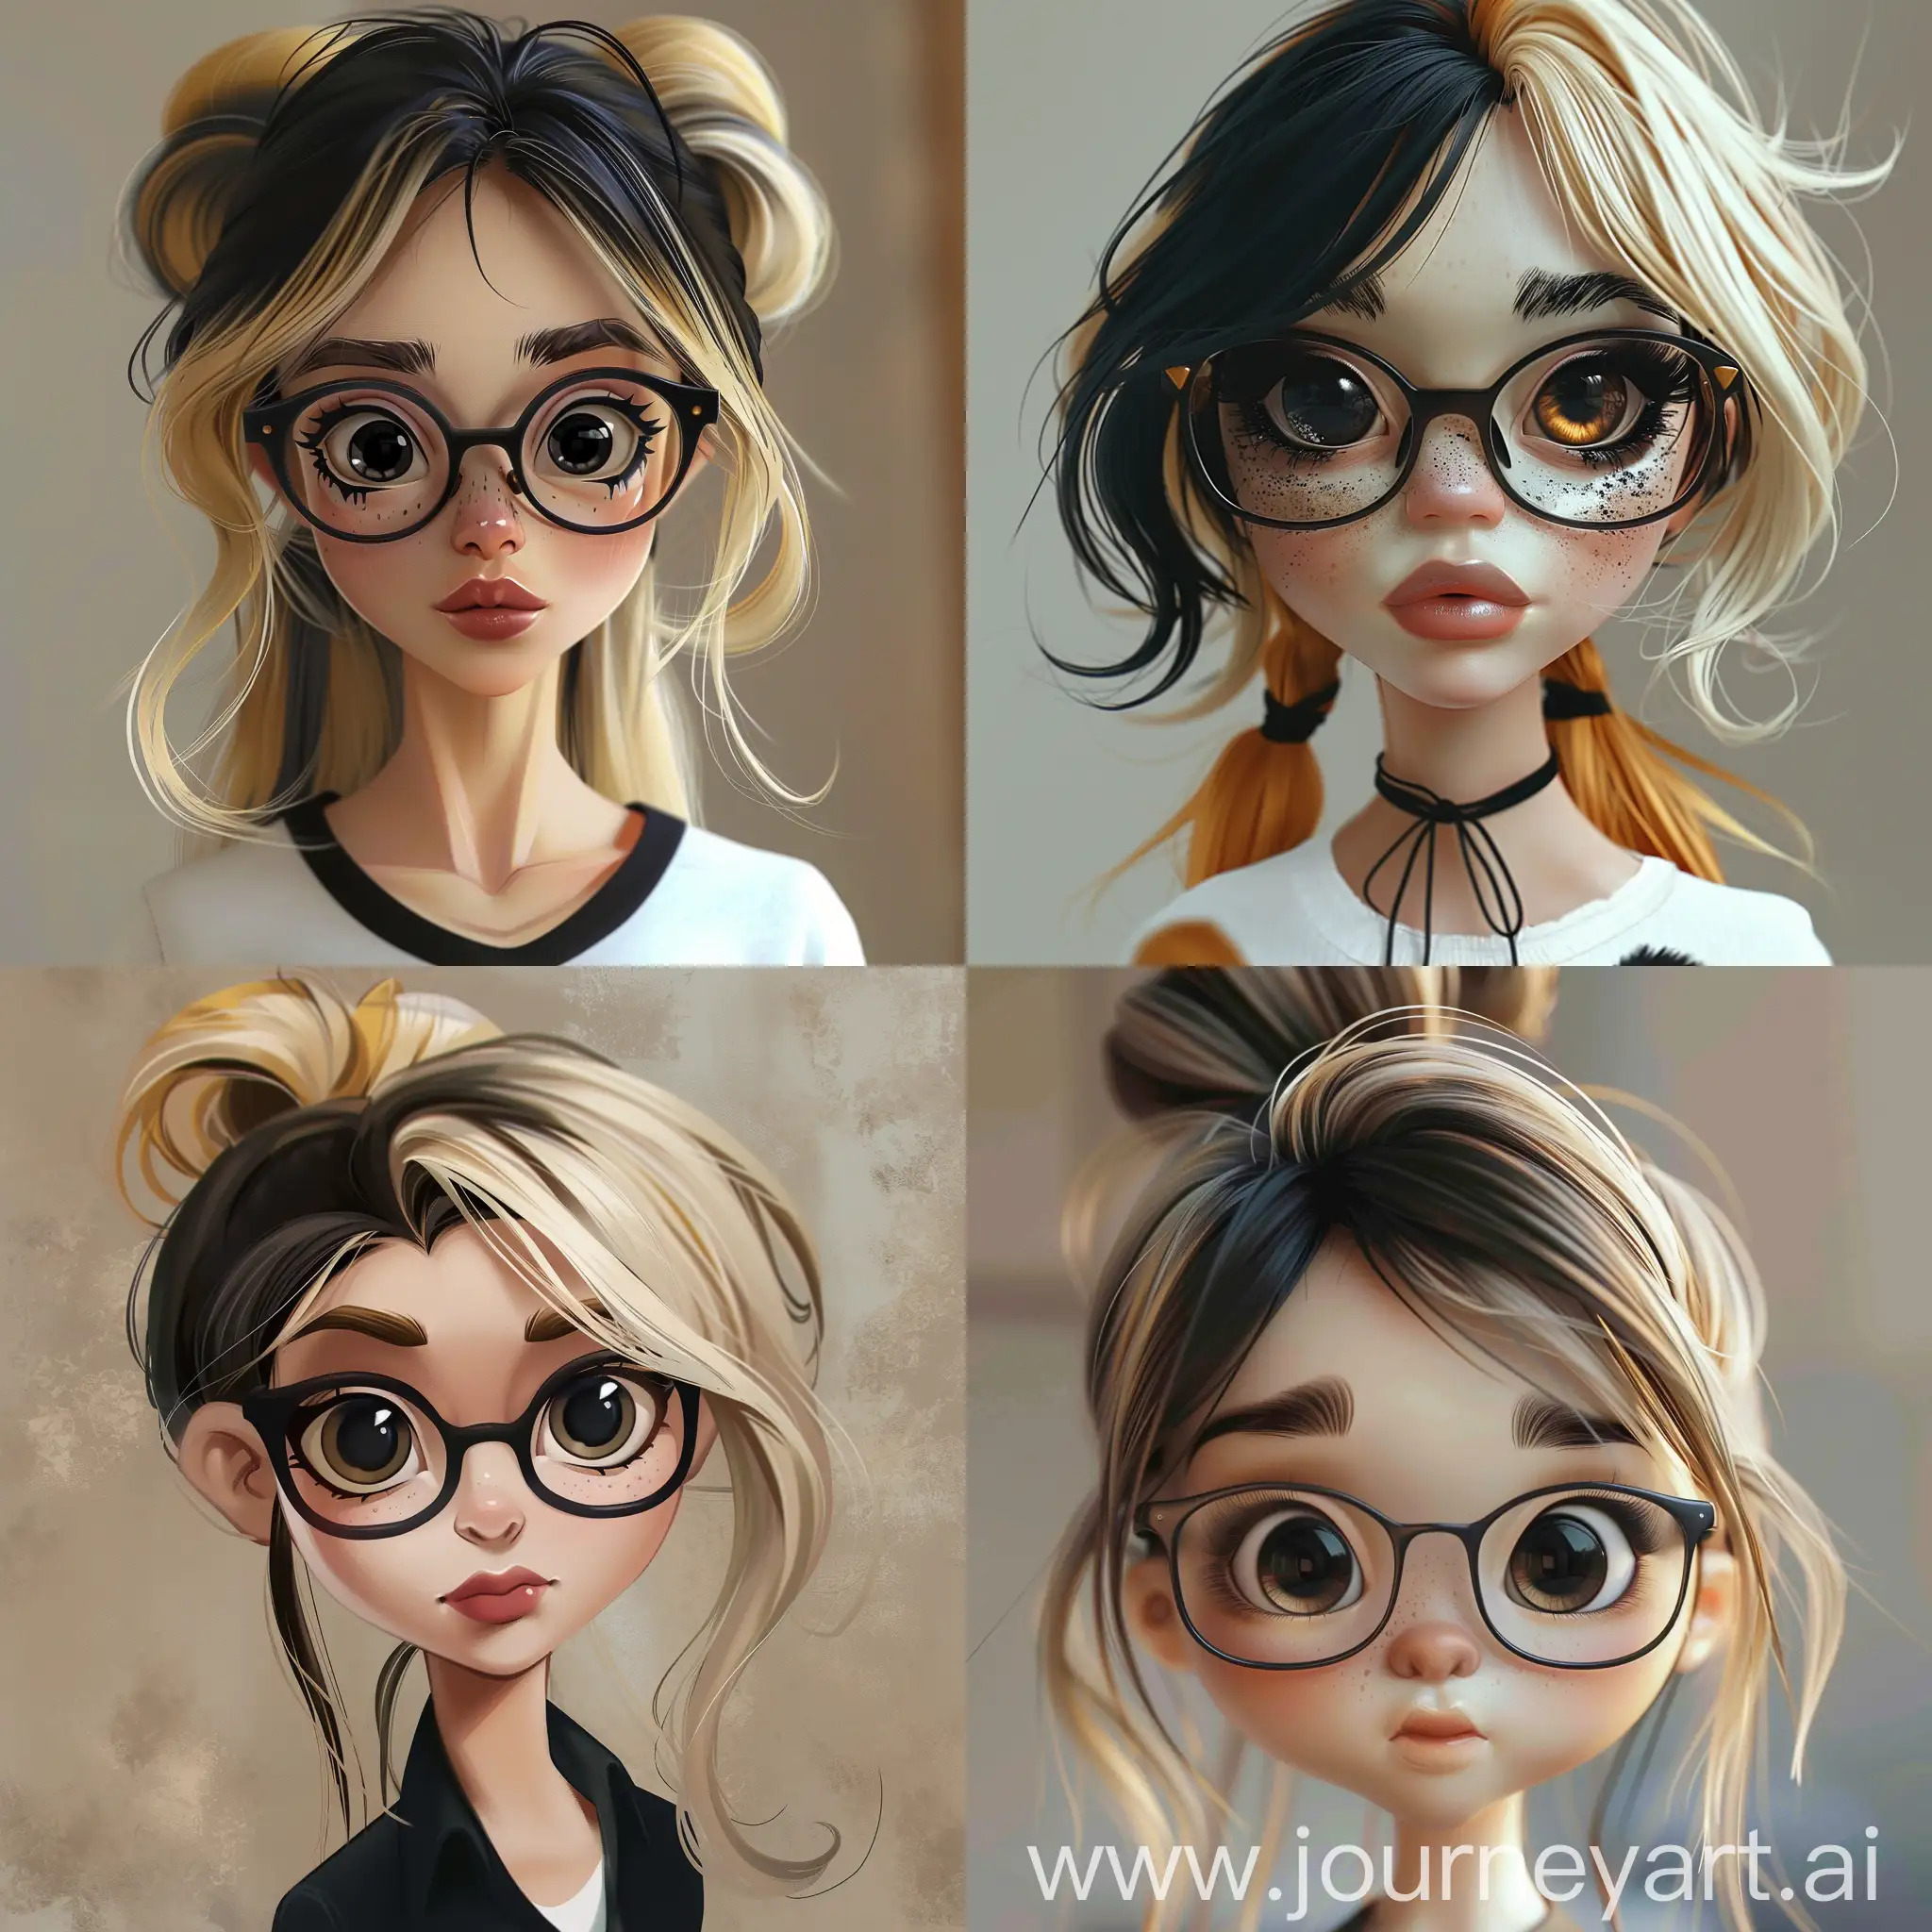 The architect's girl with a wheat face with a beautiful glasses and light blonde and black highlighted hair and big black eyes who has her hair in a ponytail.